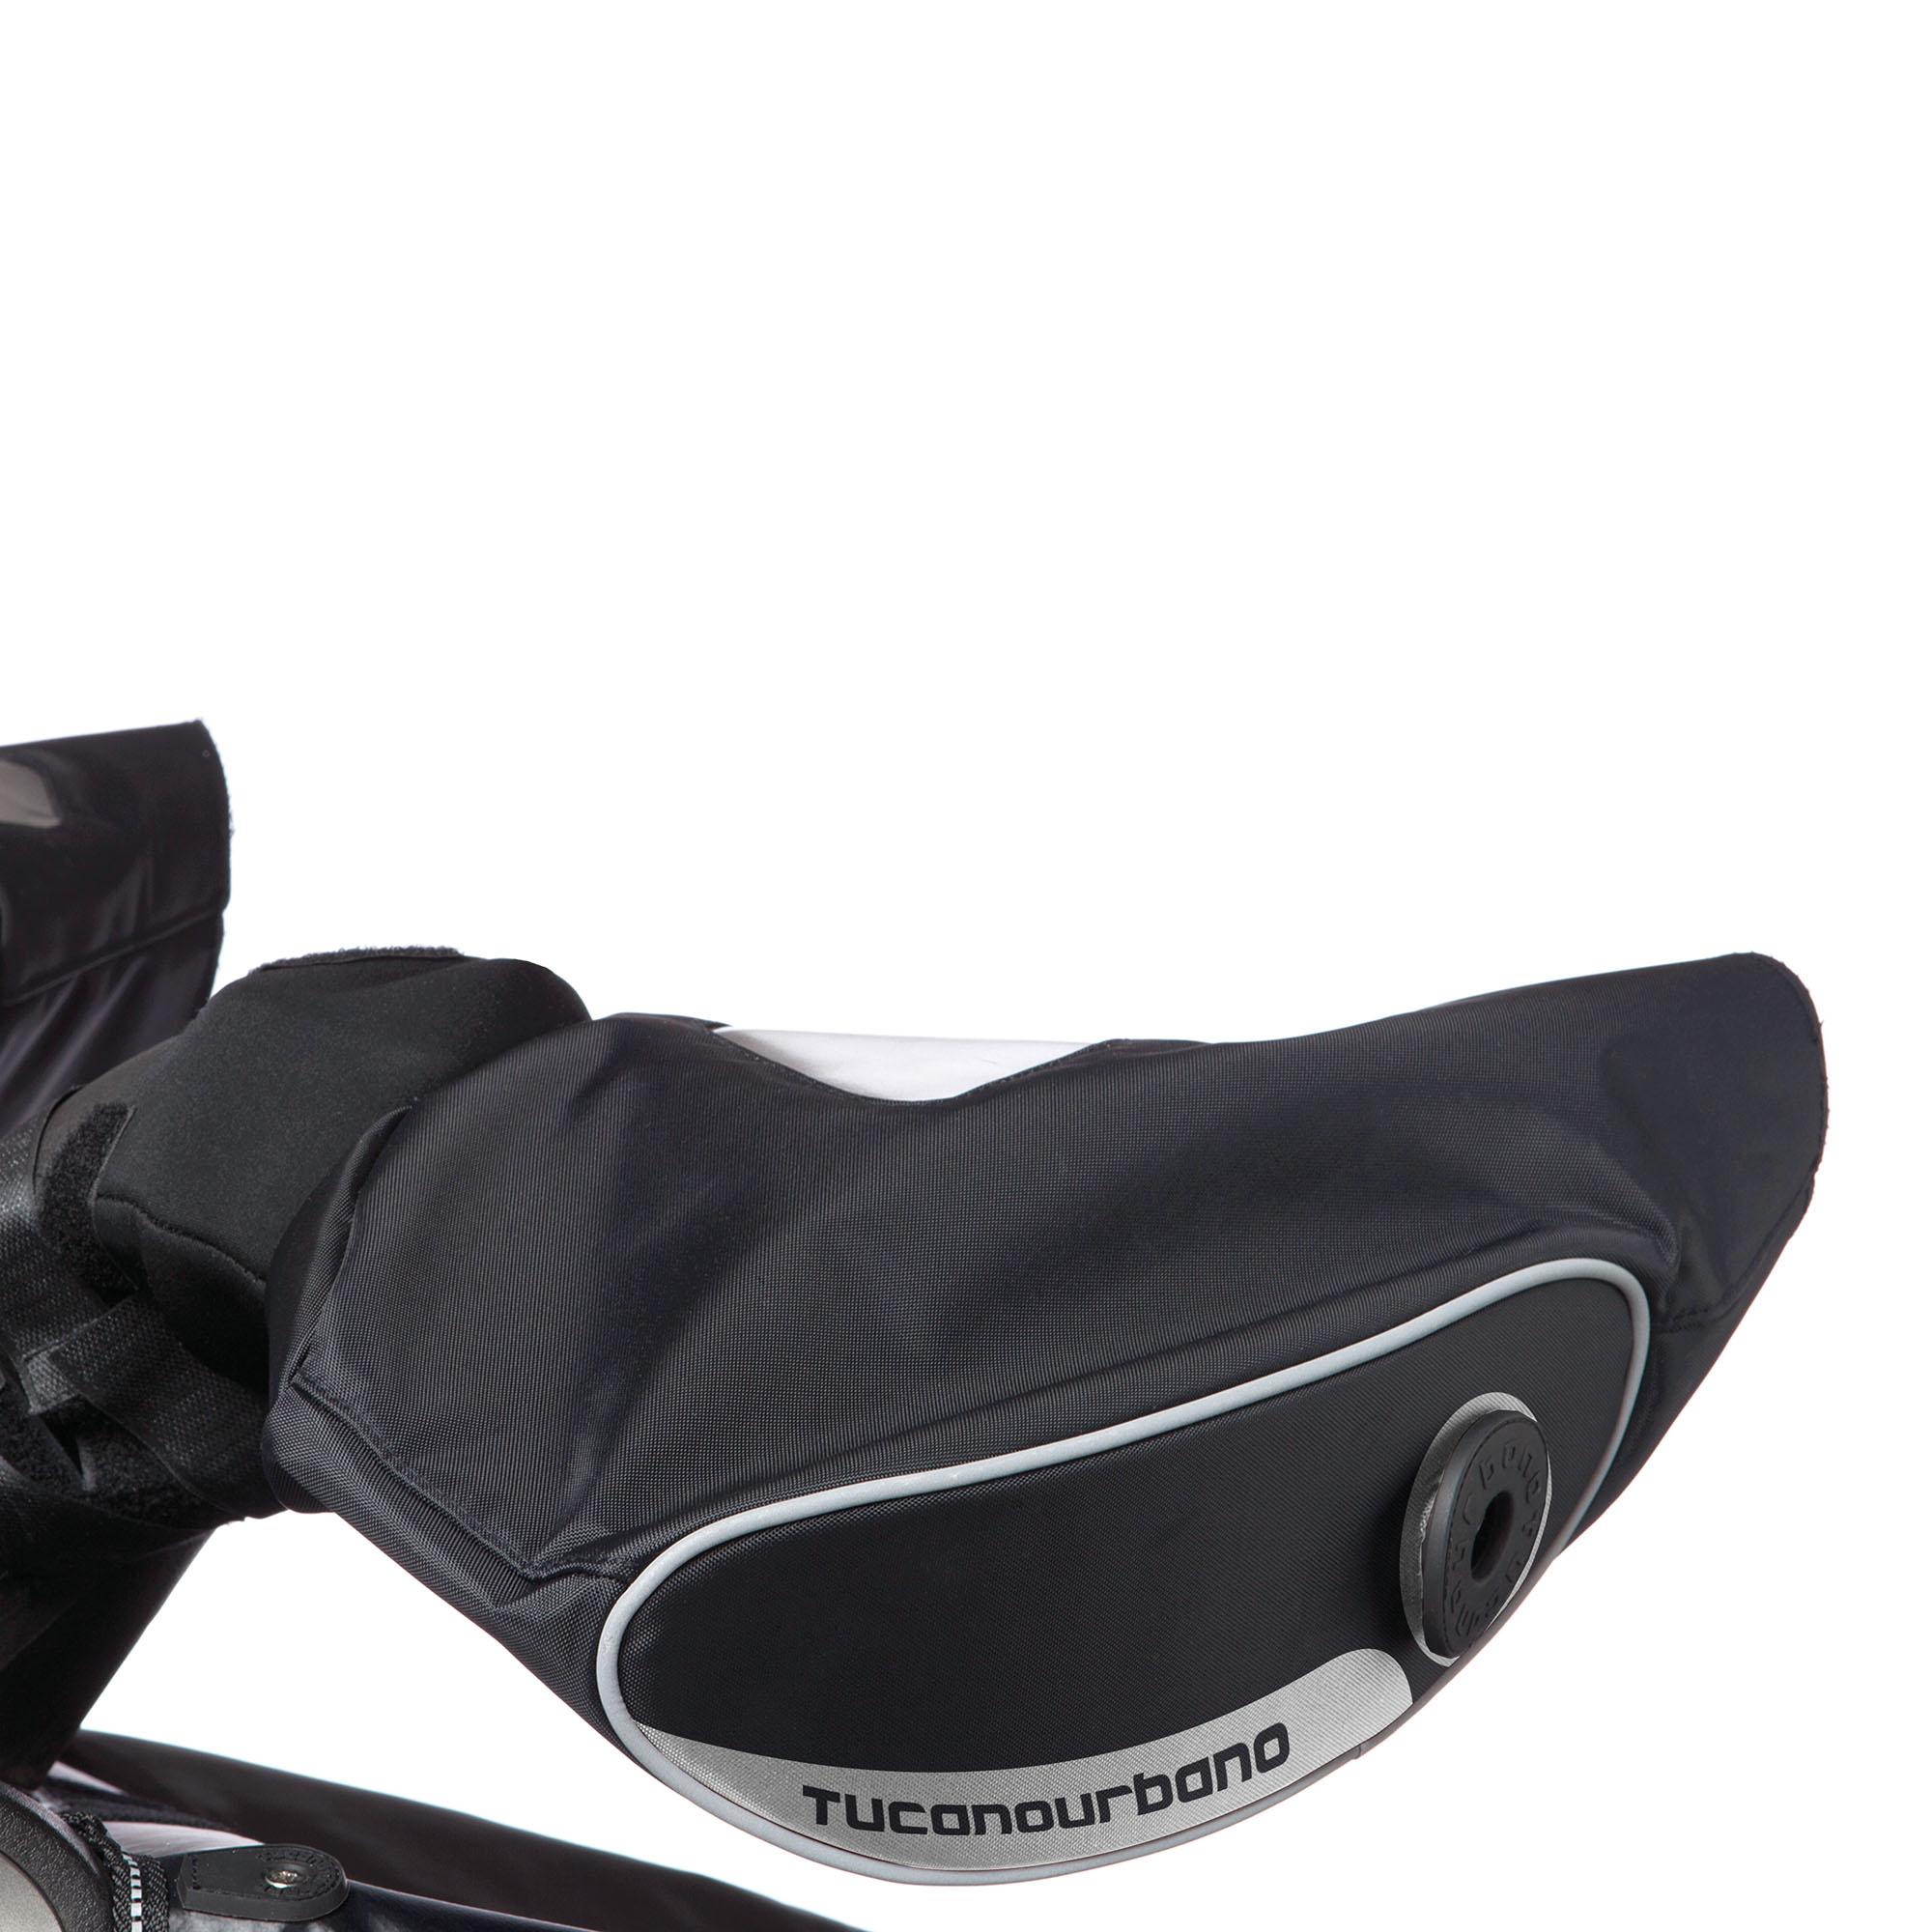 Polyamide Hand Grip Covers For Handlebars Without Mirrors Black 